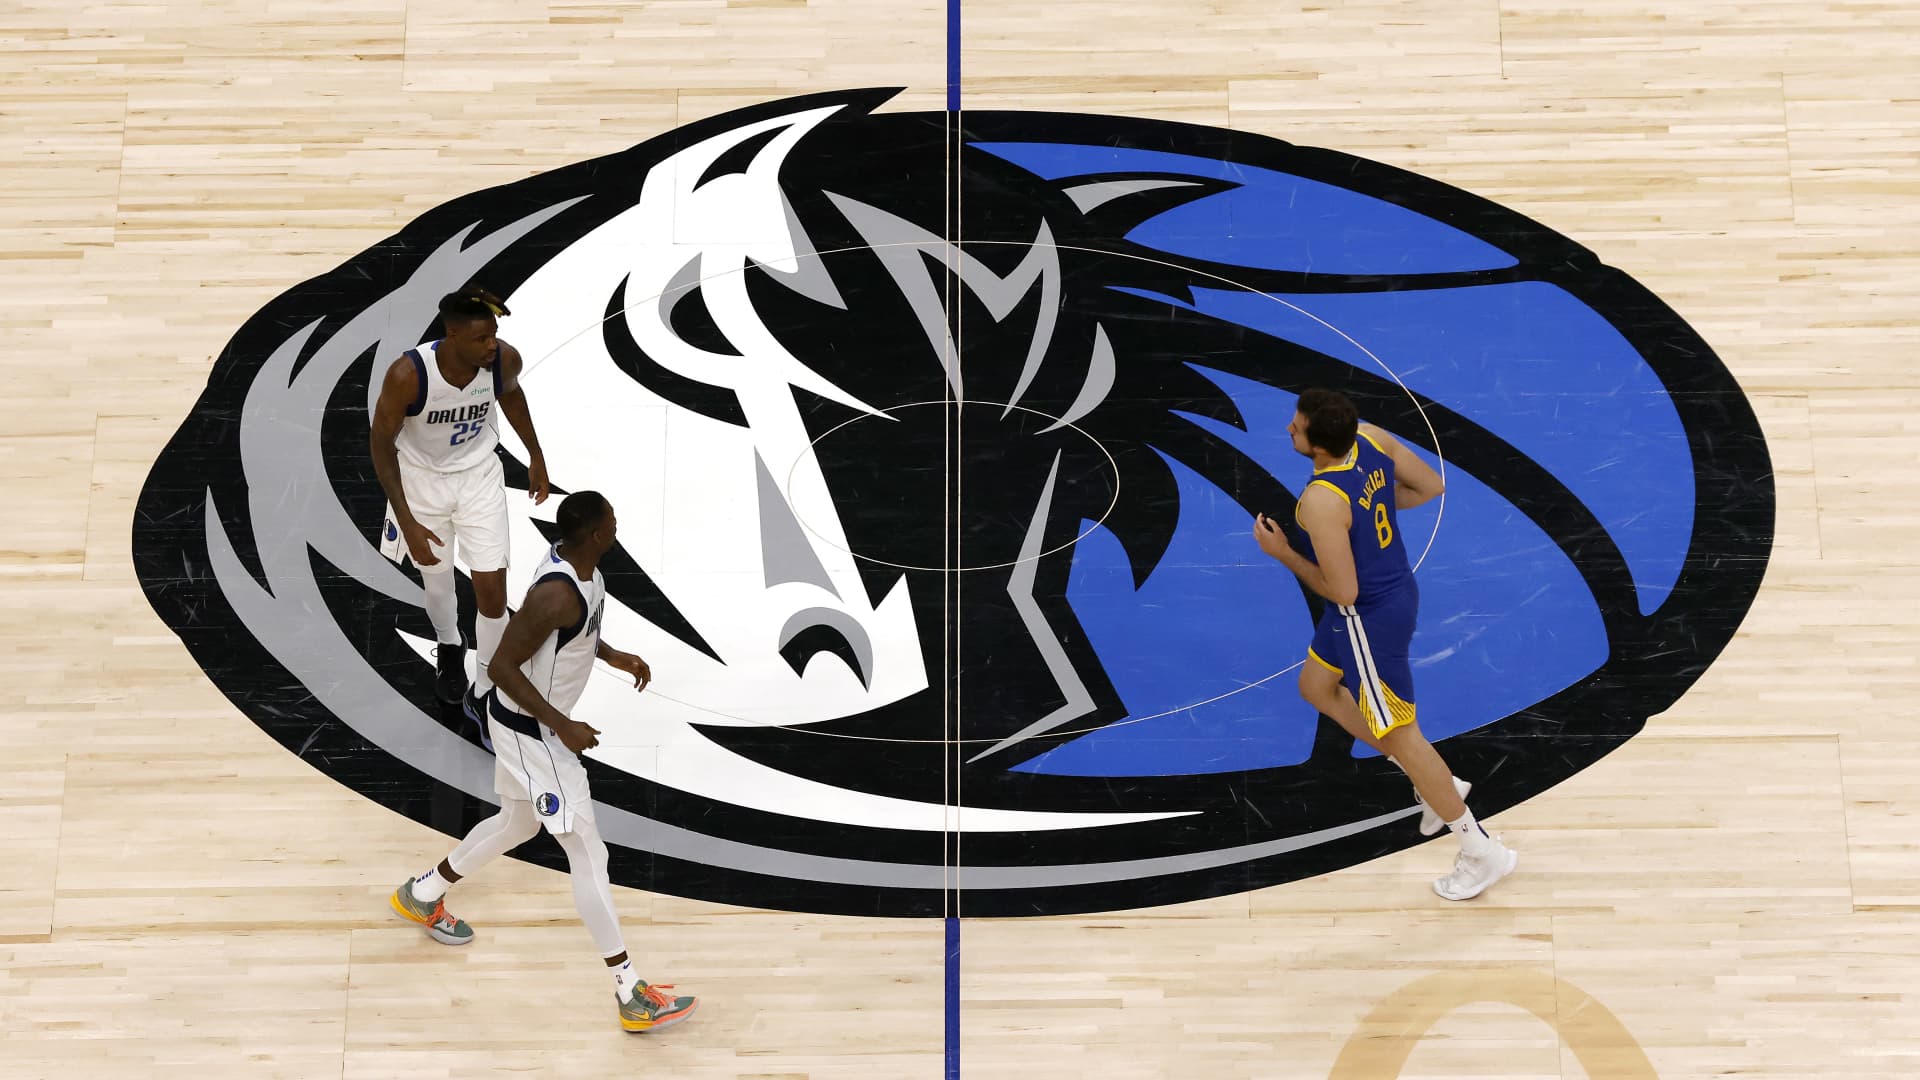 A detailed view of the Dallas Mavericks logo on the court during the fourth quarter in Game Four of the 2022 NBA Playoffs Western Conference Finals between the Golden State Warriors and the Dallas Mavericks at American Airlines Center on May 24, 2022 in Dallas, Texas.